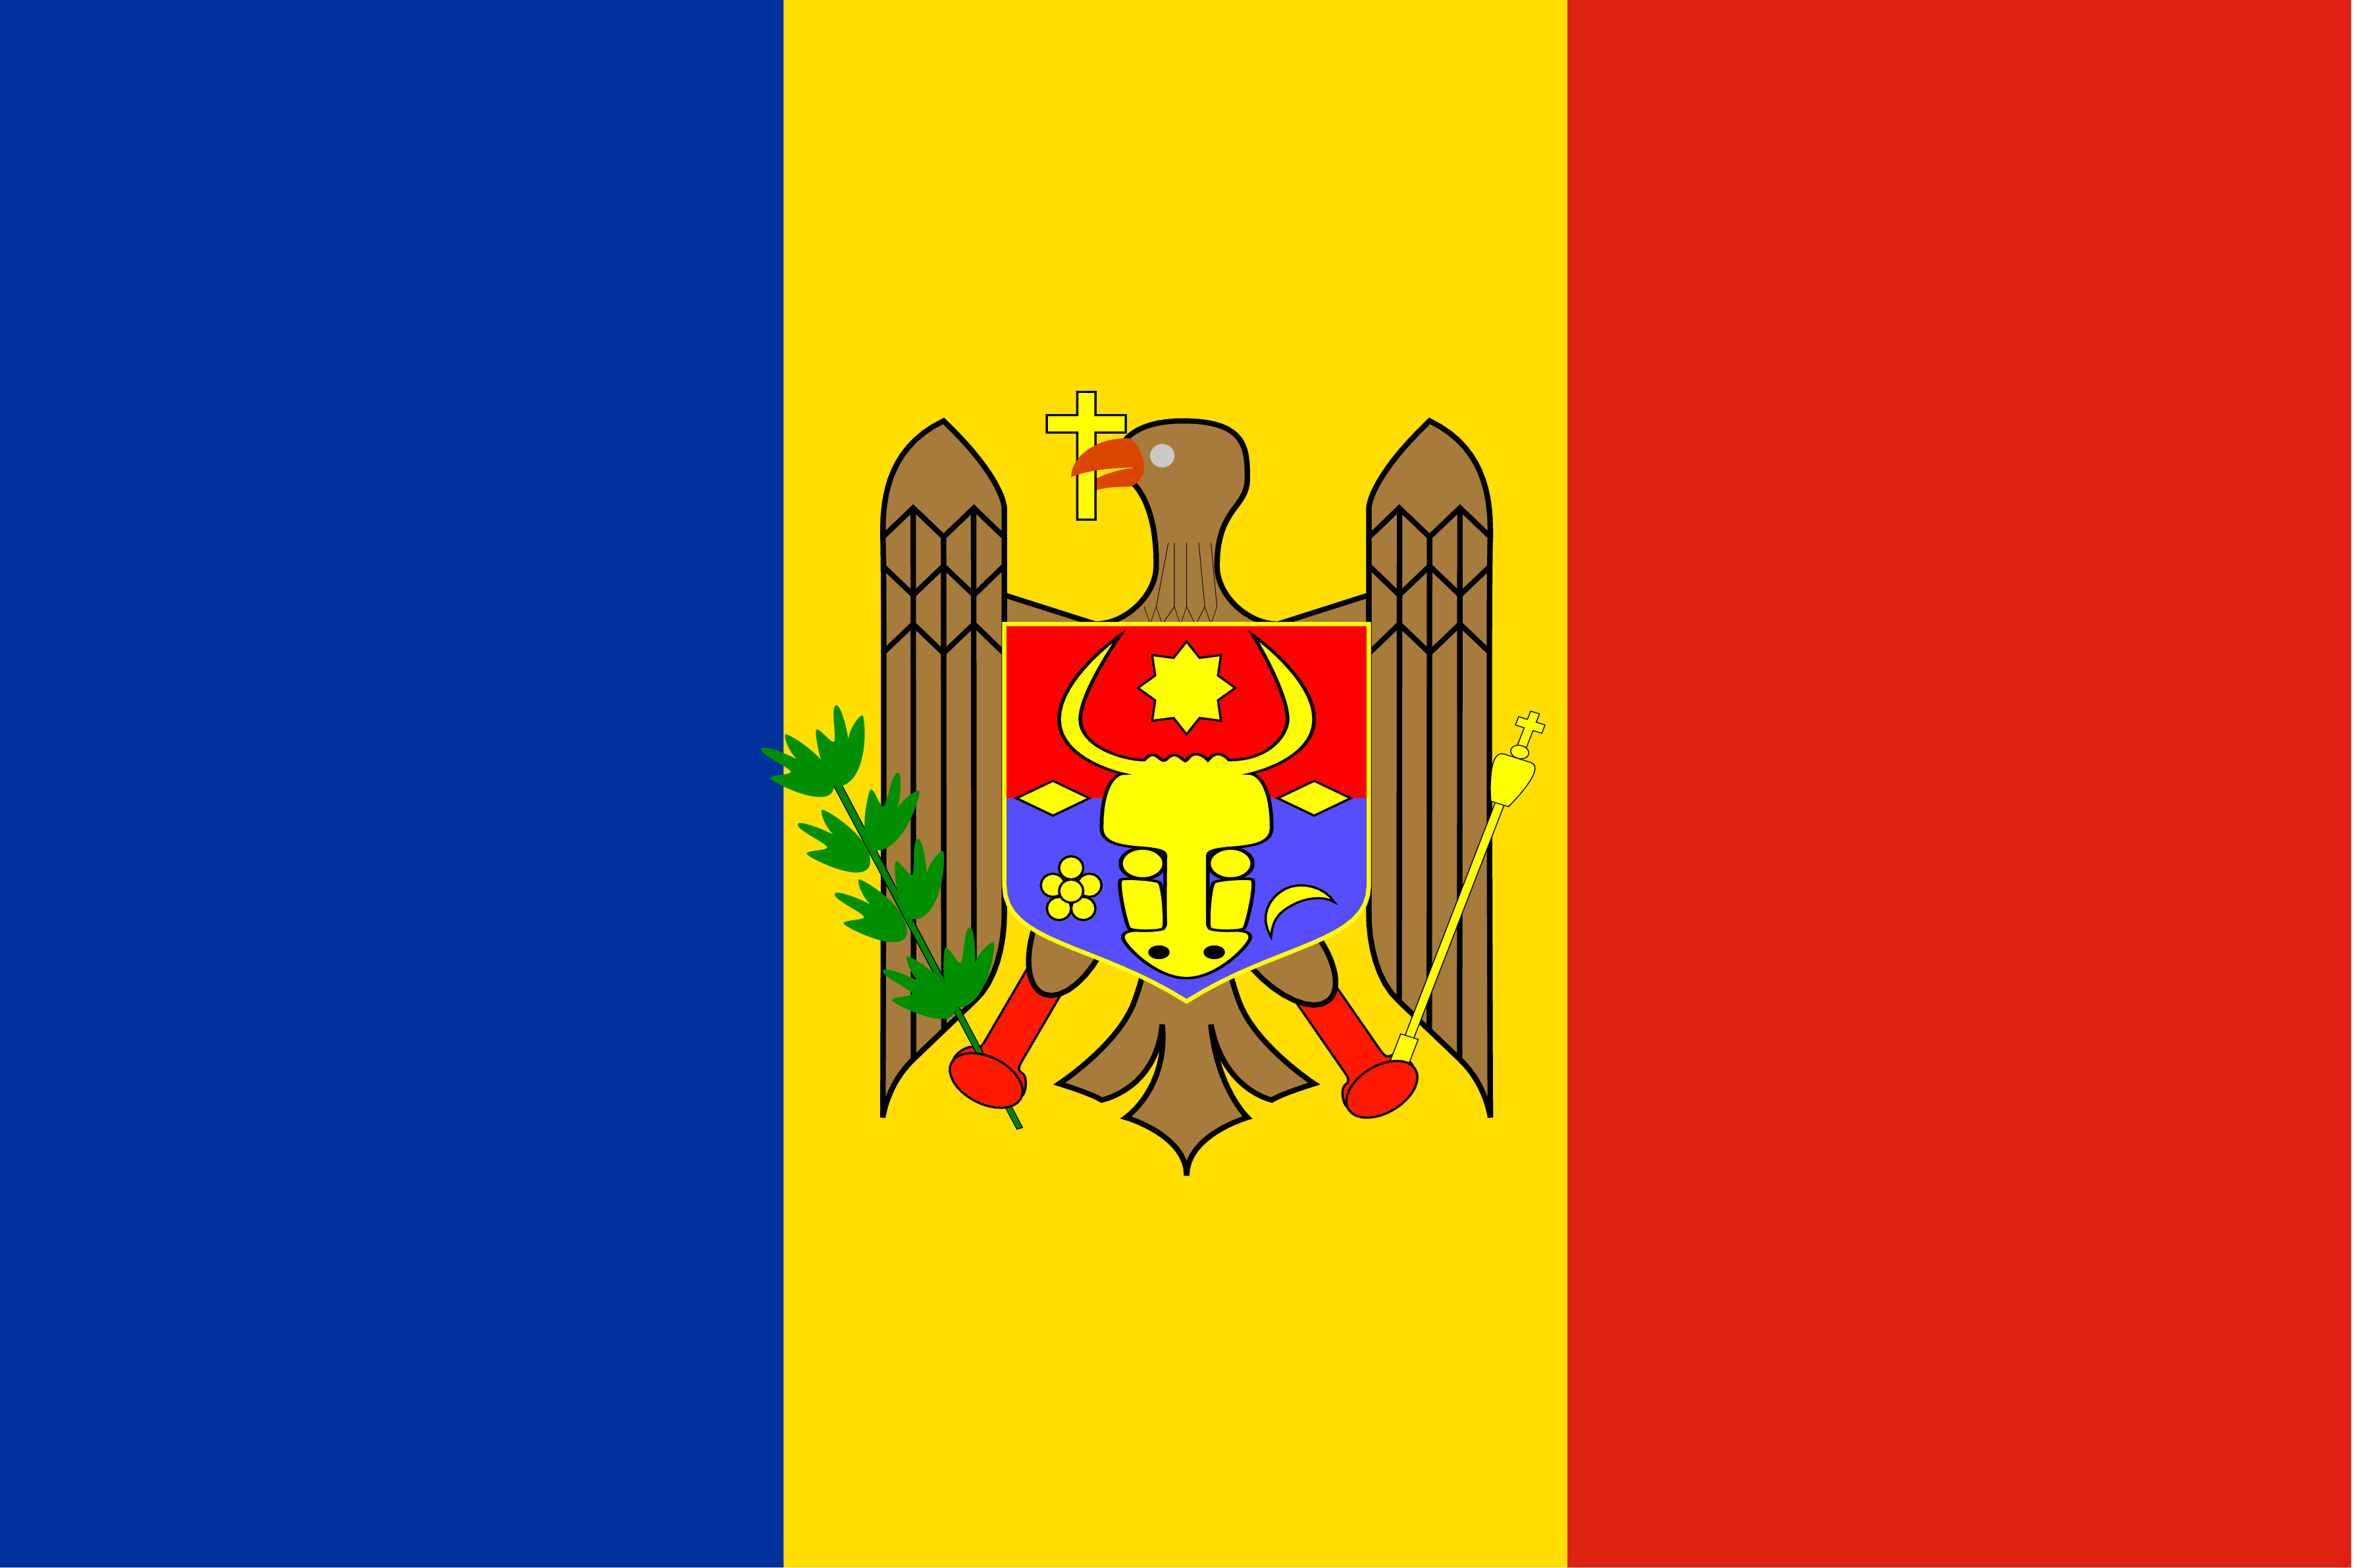 The Moldova flag was officially adopted on May 12, 1990. Once part